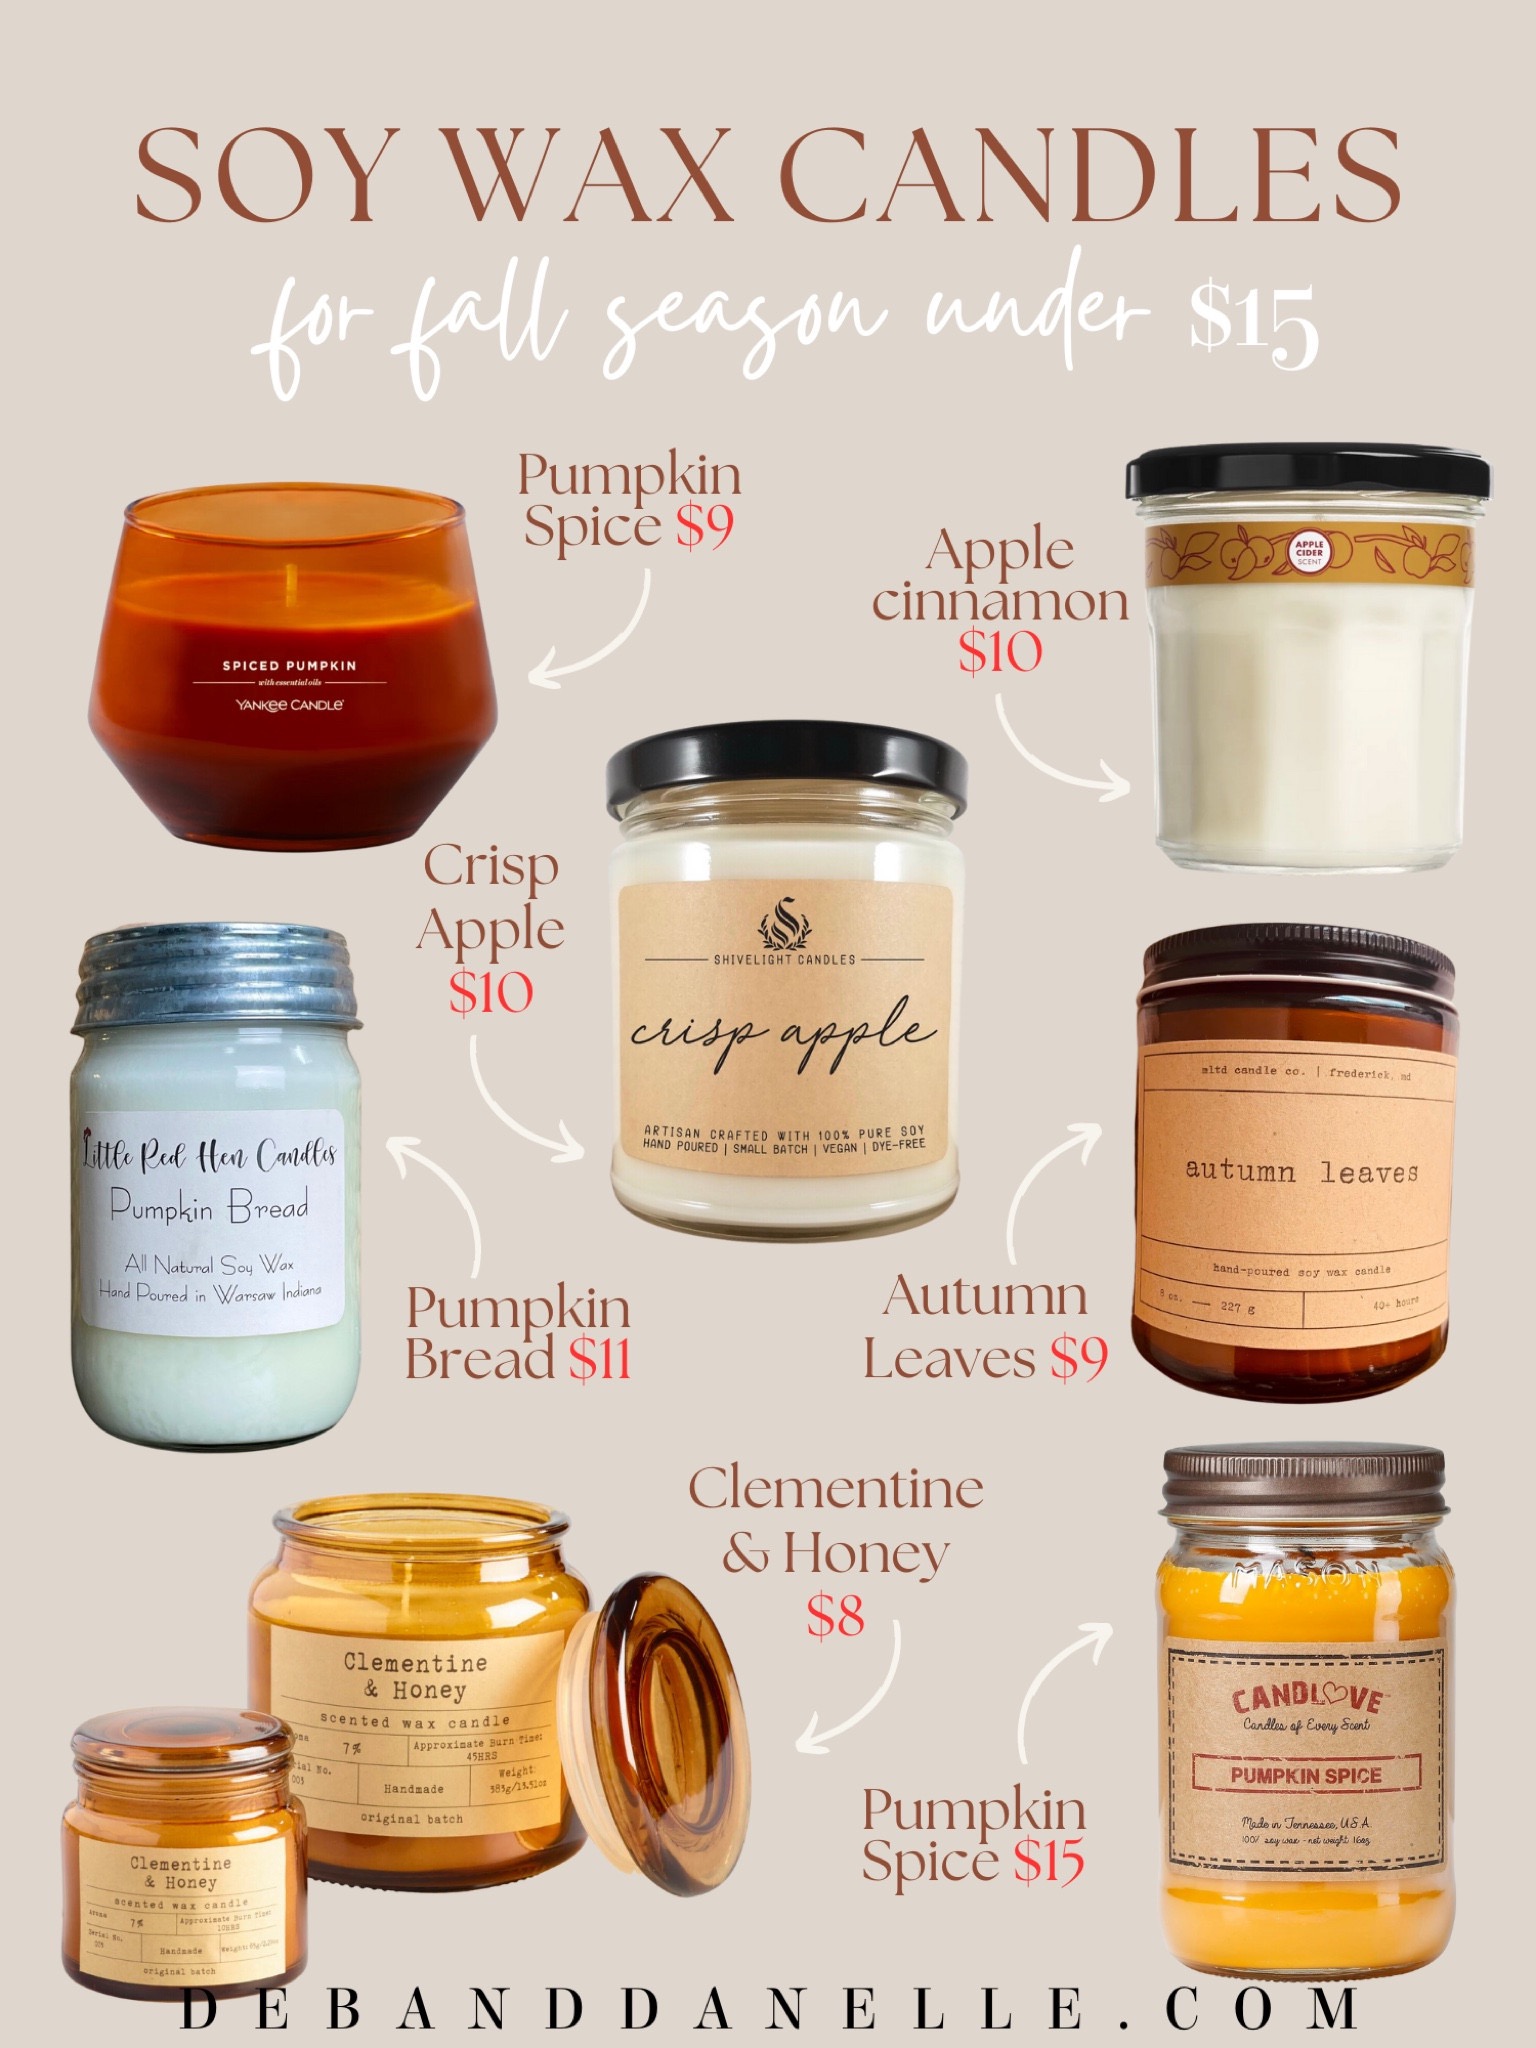 Fall candles under $15